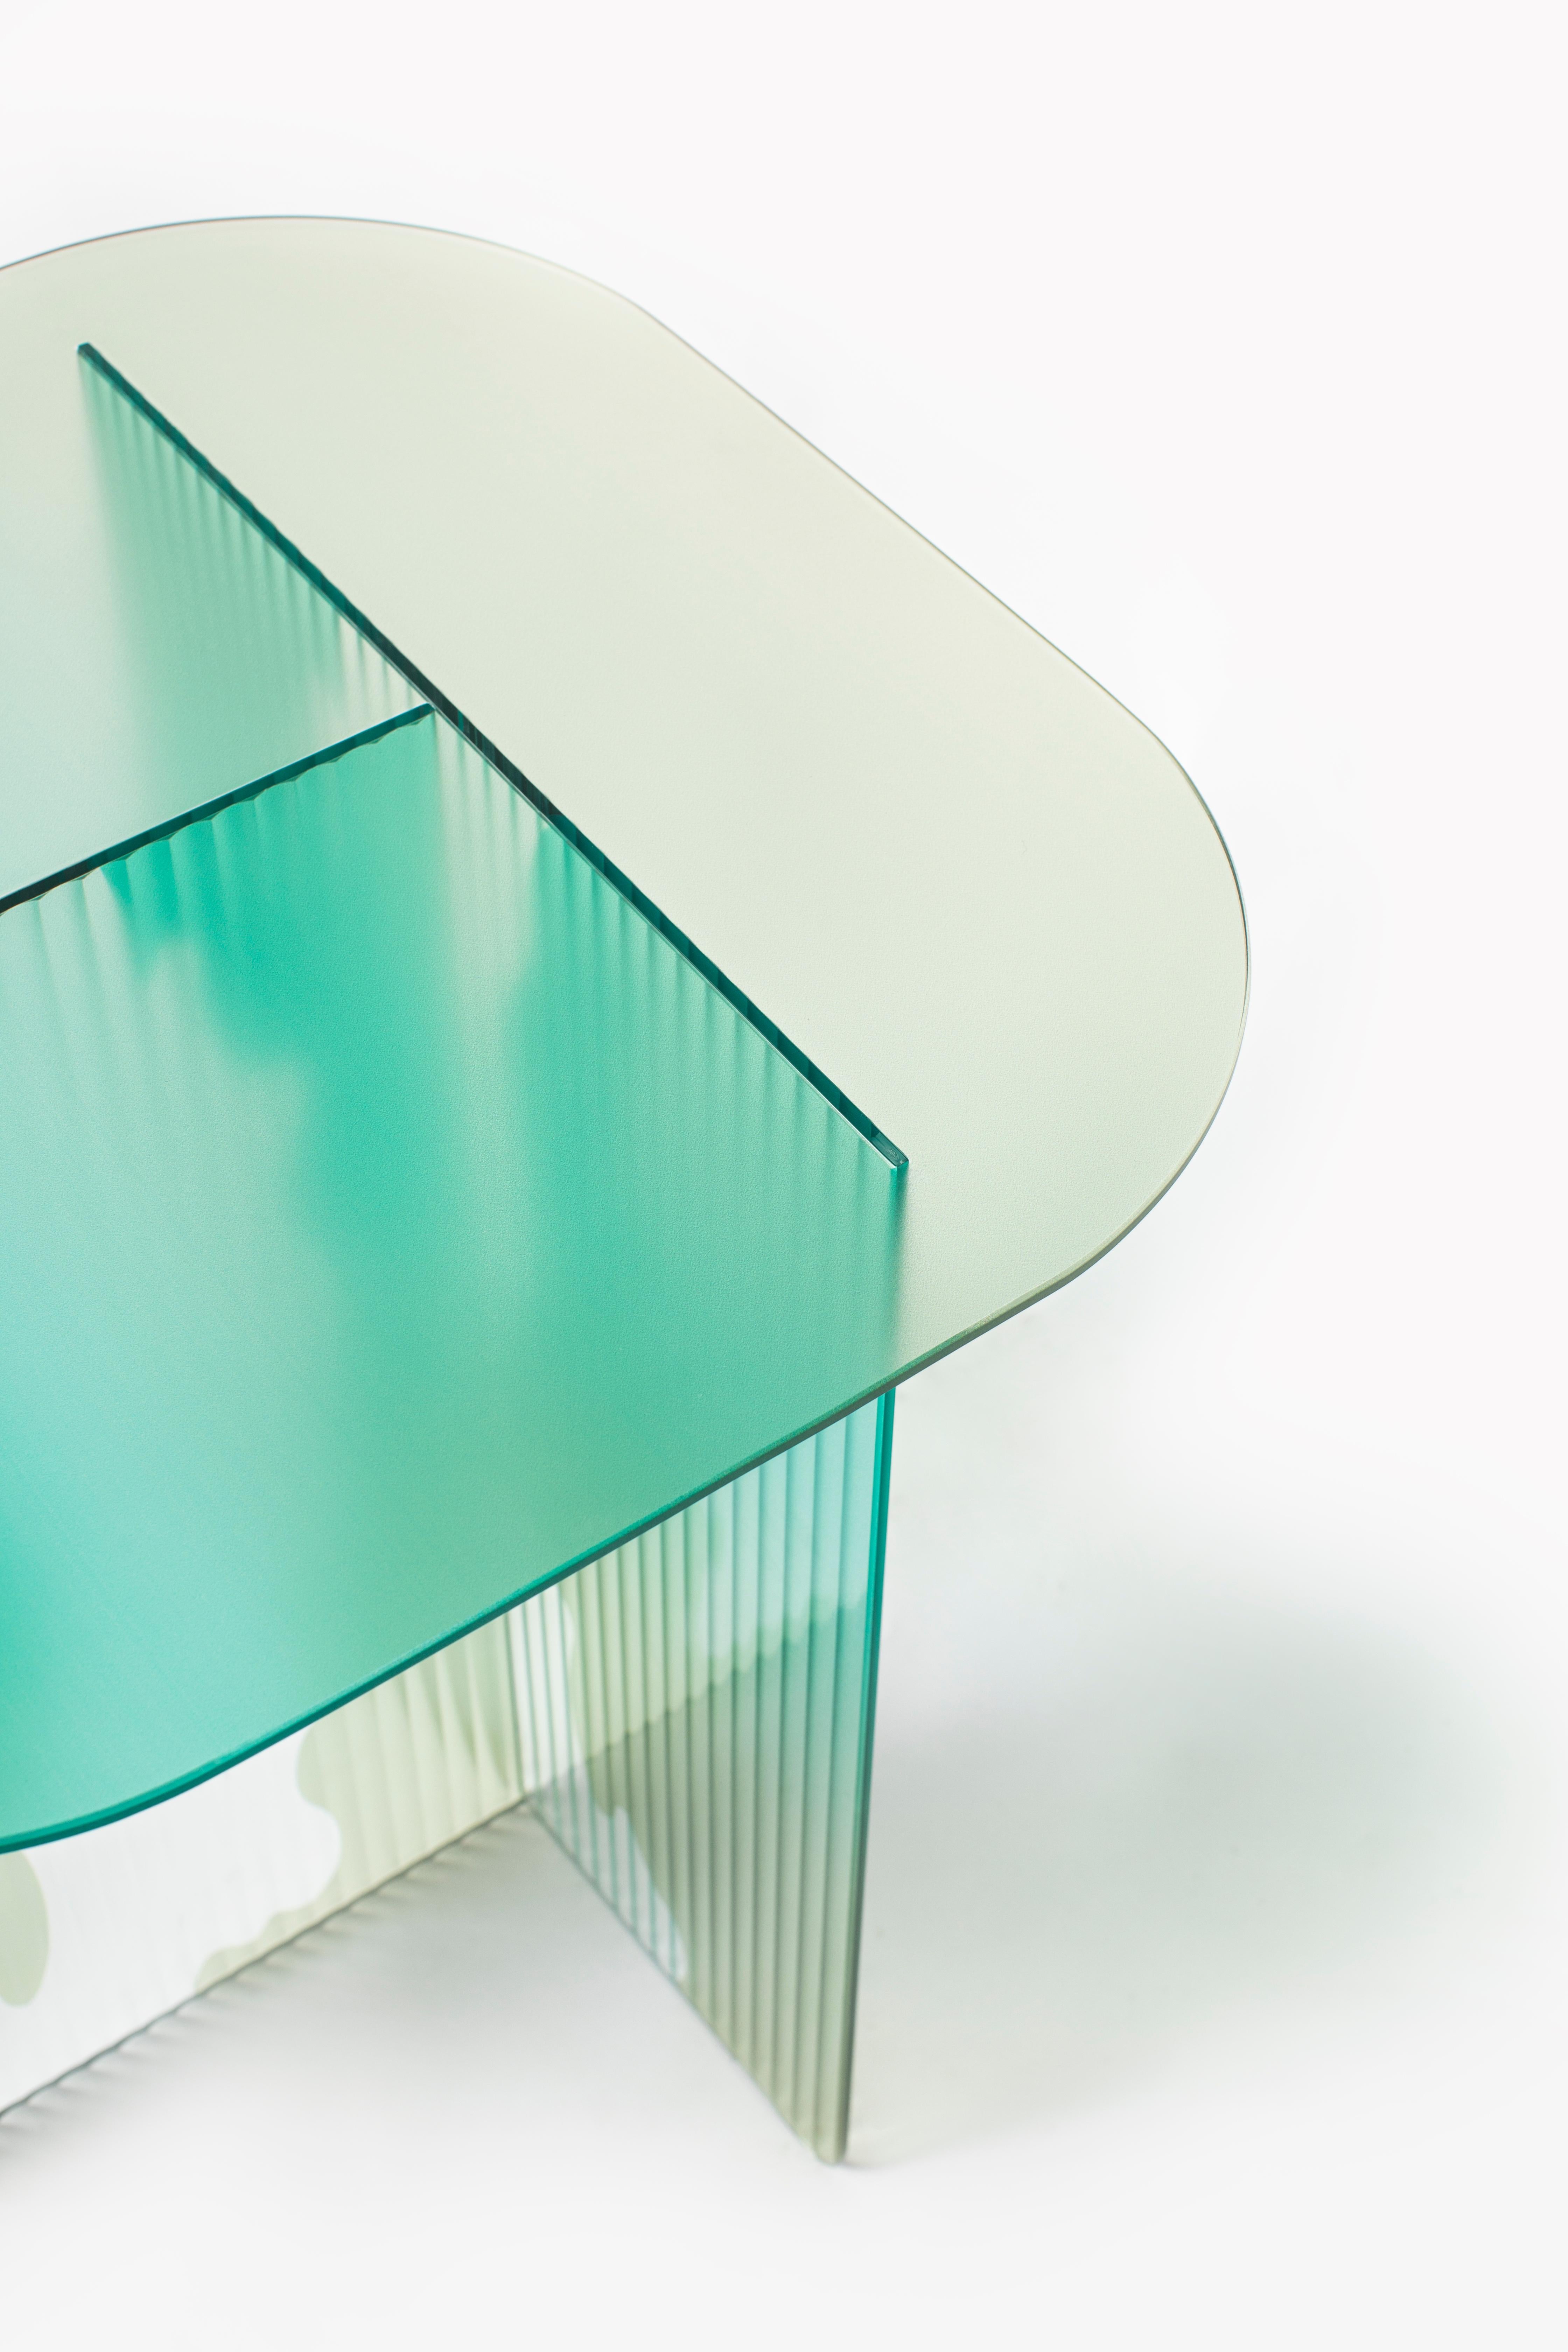 IVY-II is the twin sibling of IVY-I, designed as a side table inspired by colors found in nature. The tabletop is crafted from flat glass and colored using a printing technique. The legs feature ribbed glass with the same color tones, adorned with a